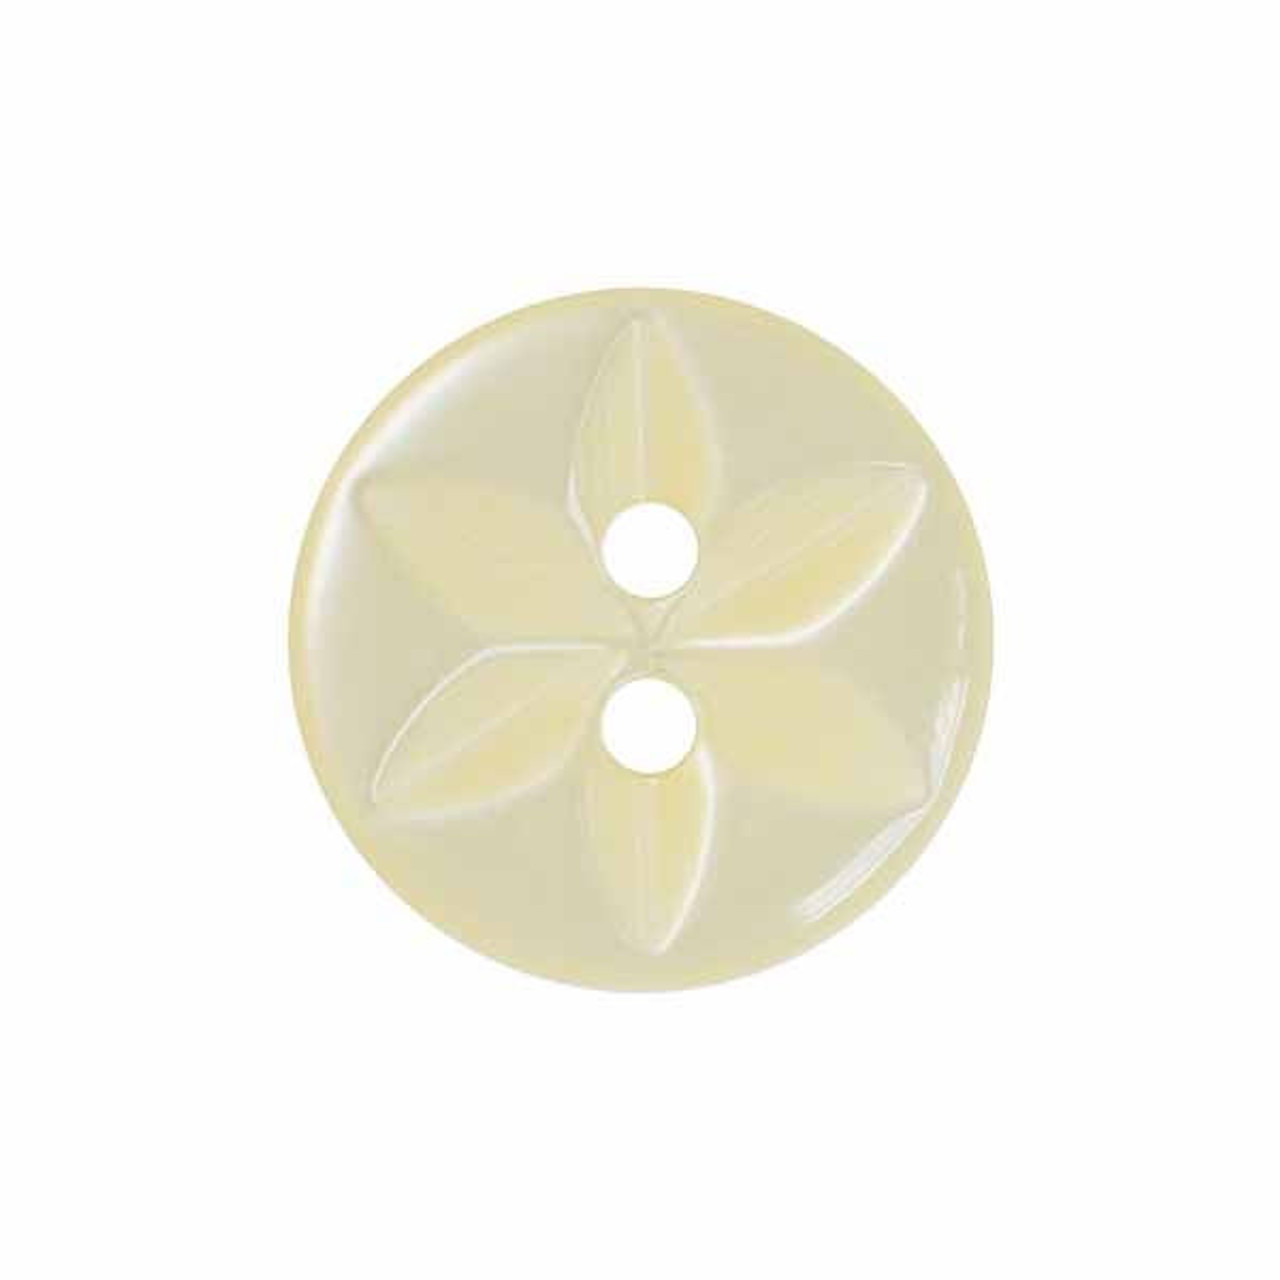 Cream Star Button, 11mm (7/16in) Diameter (Sold Individually)